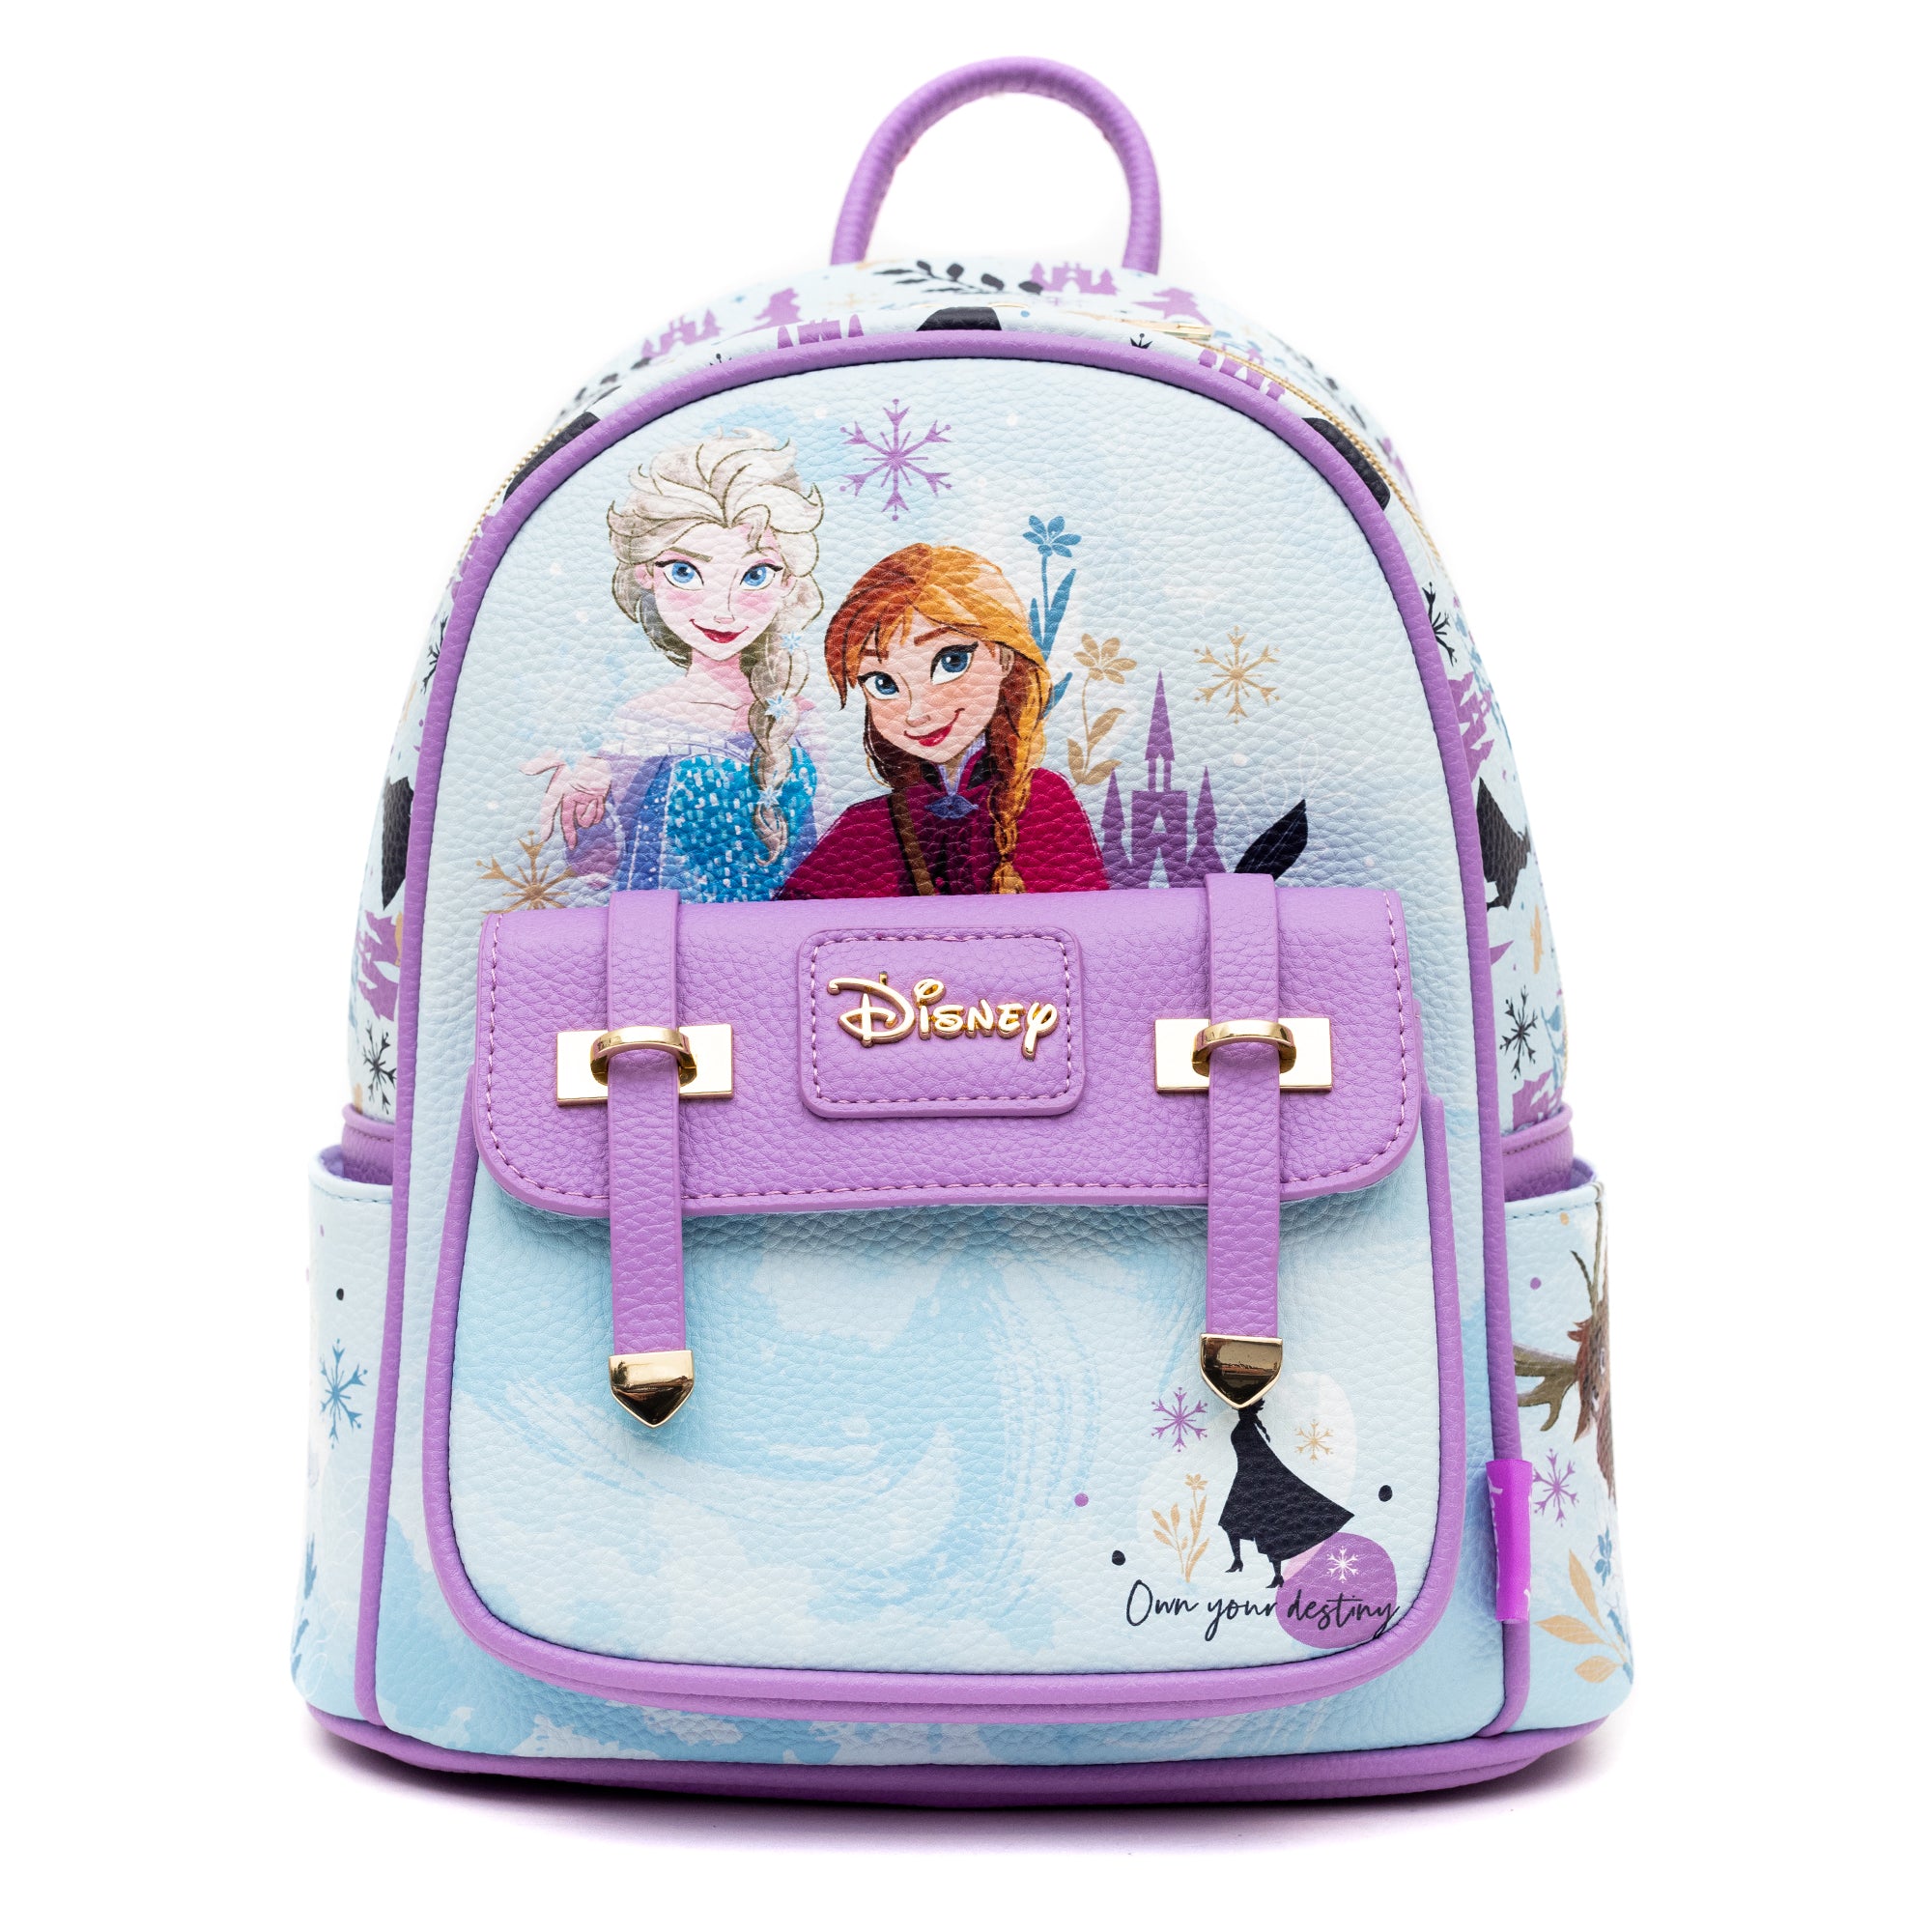 Disney Frozen Mini Backpack - Limited Edition